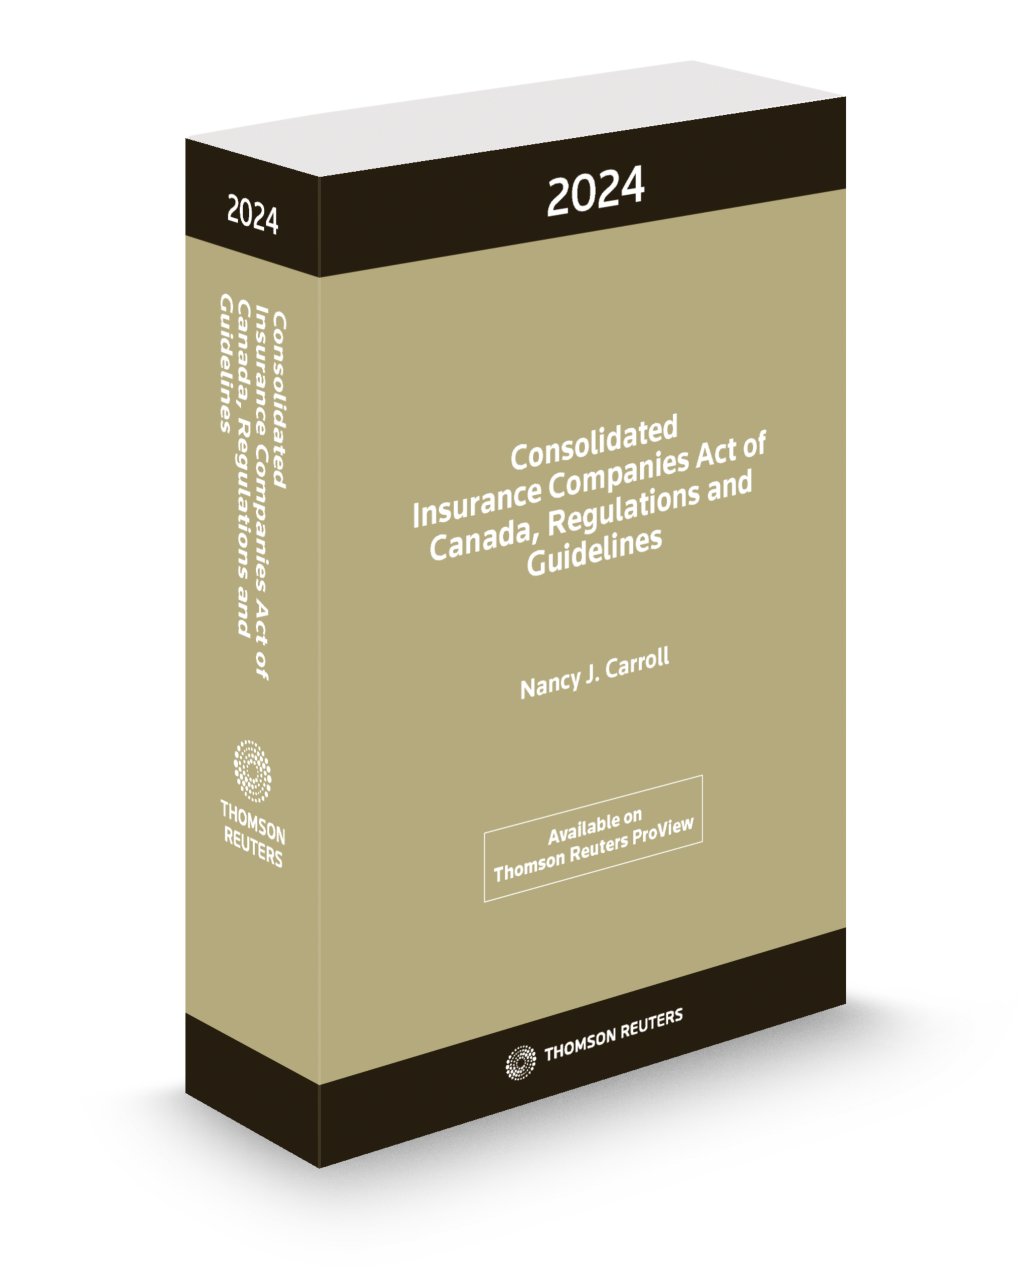 Cover of Consolidated Insurance Companies Act of Canada, Regulations and Guidelines, 2024